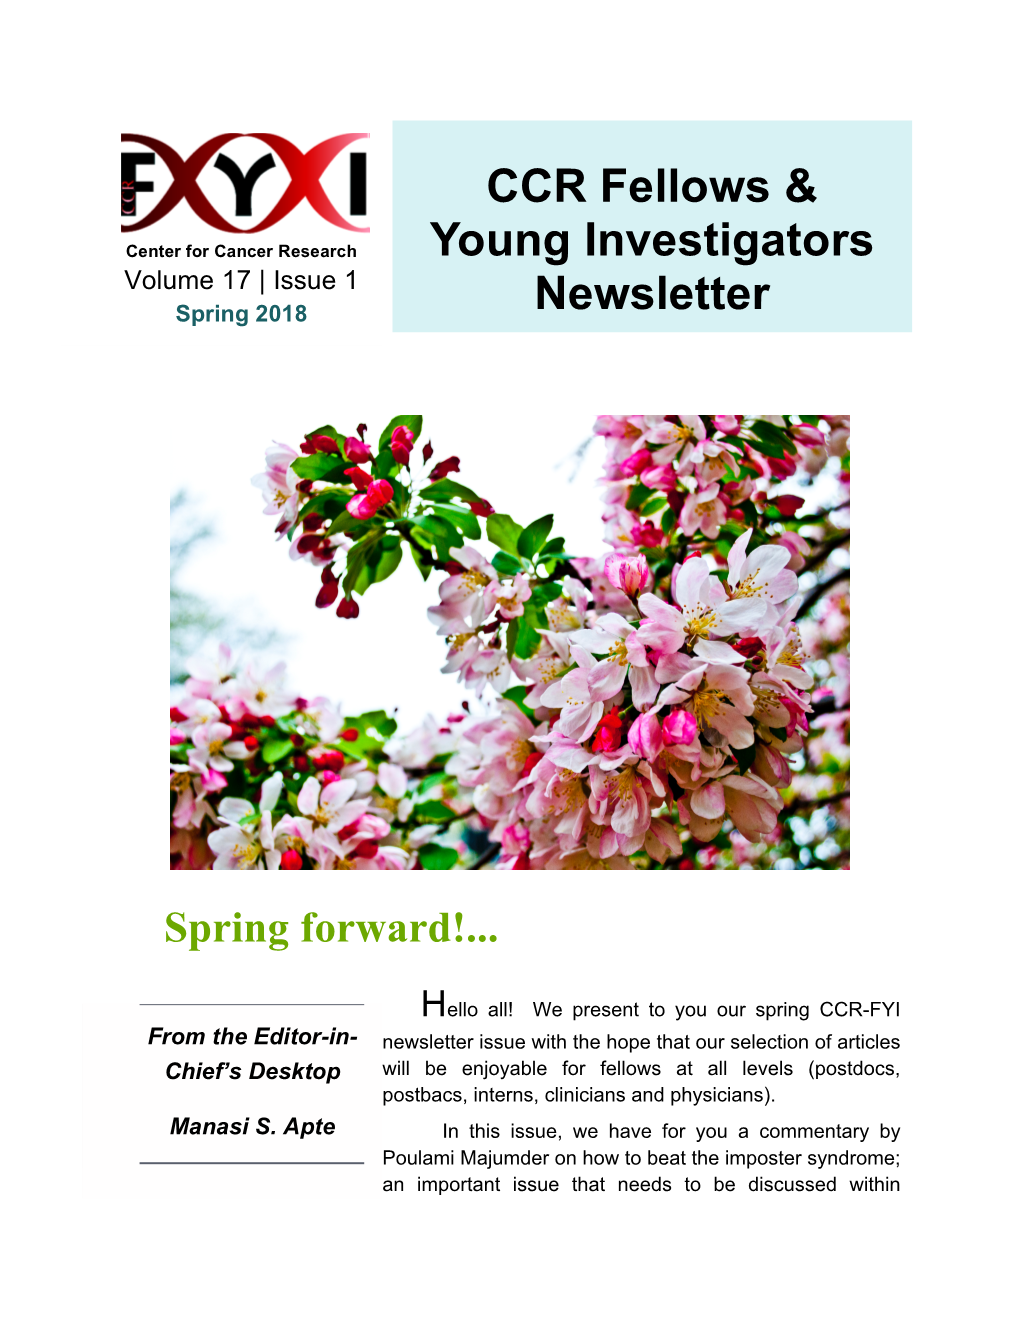 CCR Fellows & Young Investigators Newsletter